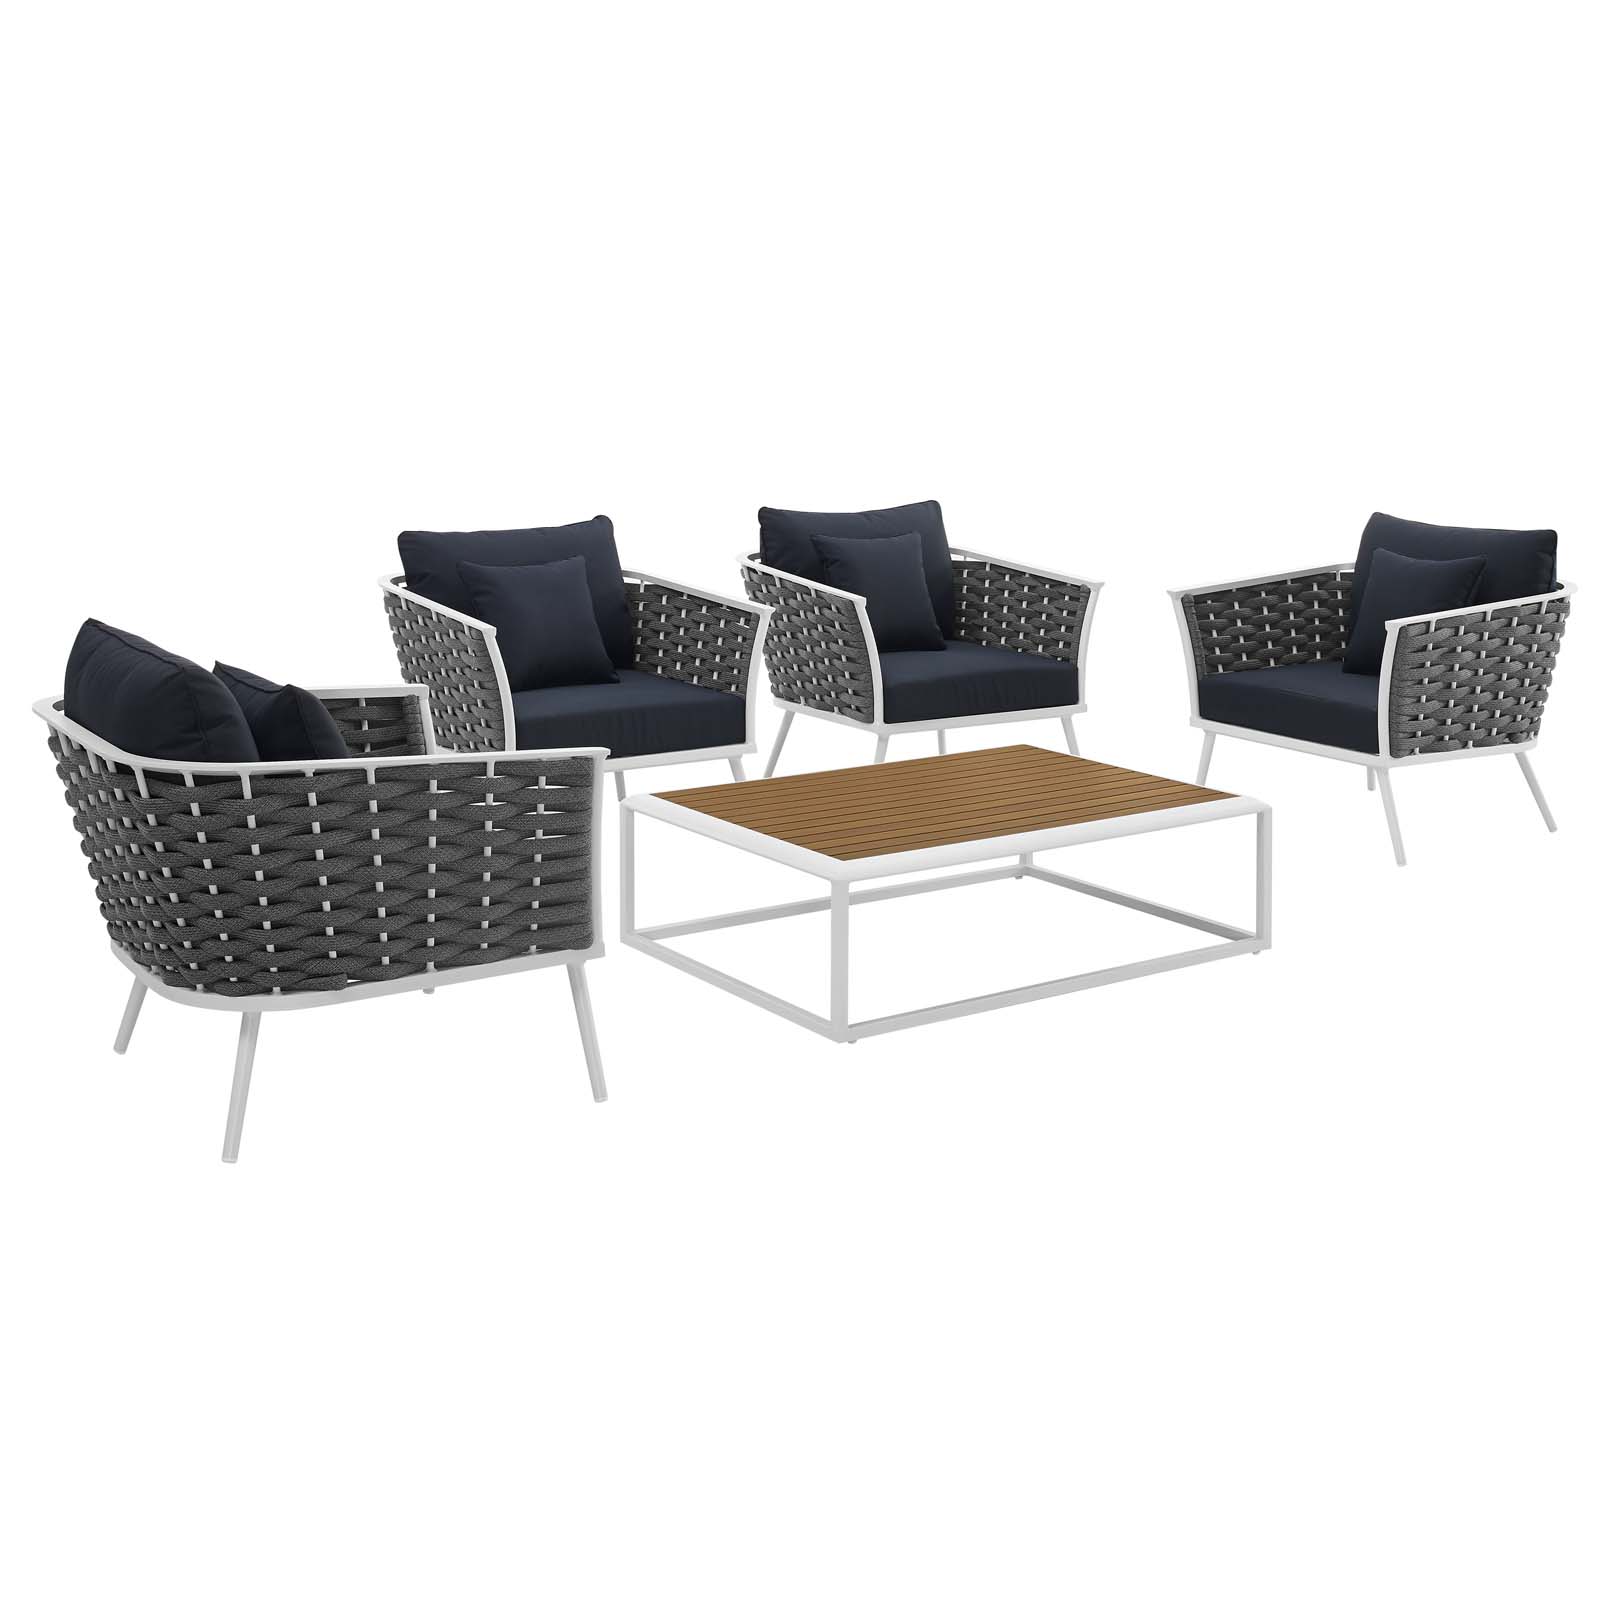 Modway Stance 5 Piece Outdoor Patio Aluminum Sectional Sofa Set in White Navy - image 2 of 8